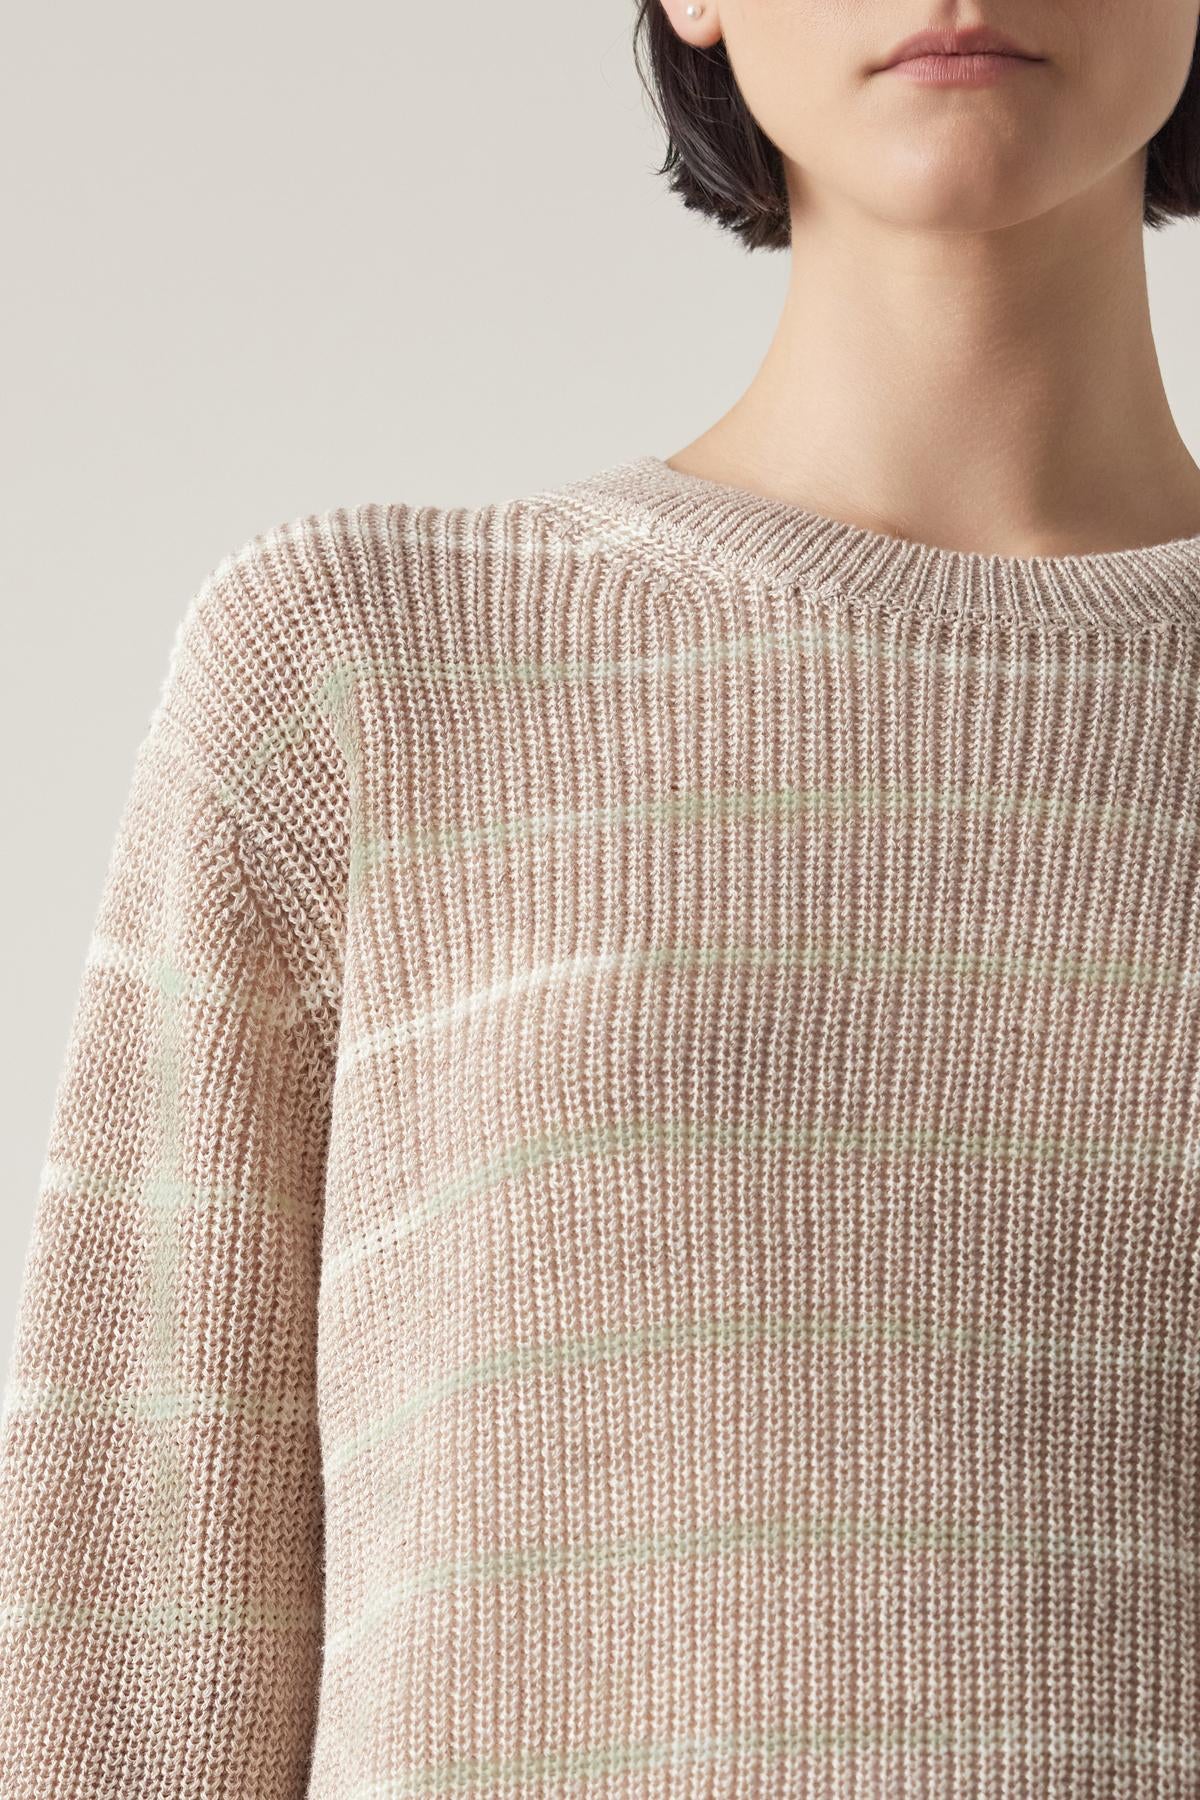 Close-up of a woman wearing a sheer, Velvet by Jenny Graham INDIO LINEN SWEATER in neutral stripes, focusing on the sweater's texture and pattern.-36863295094977